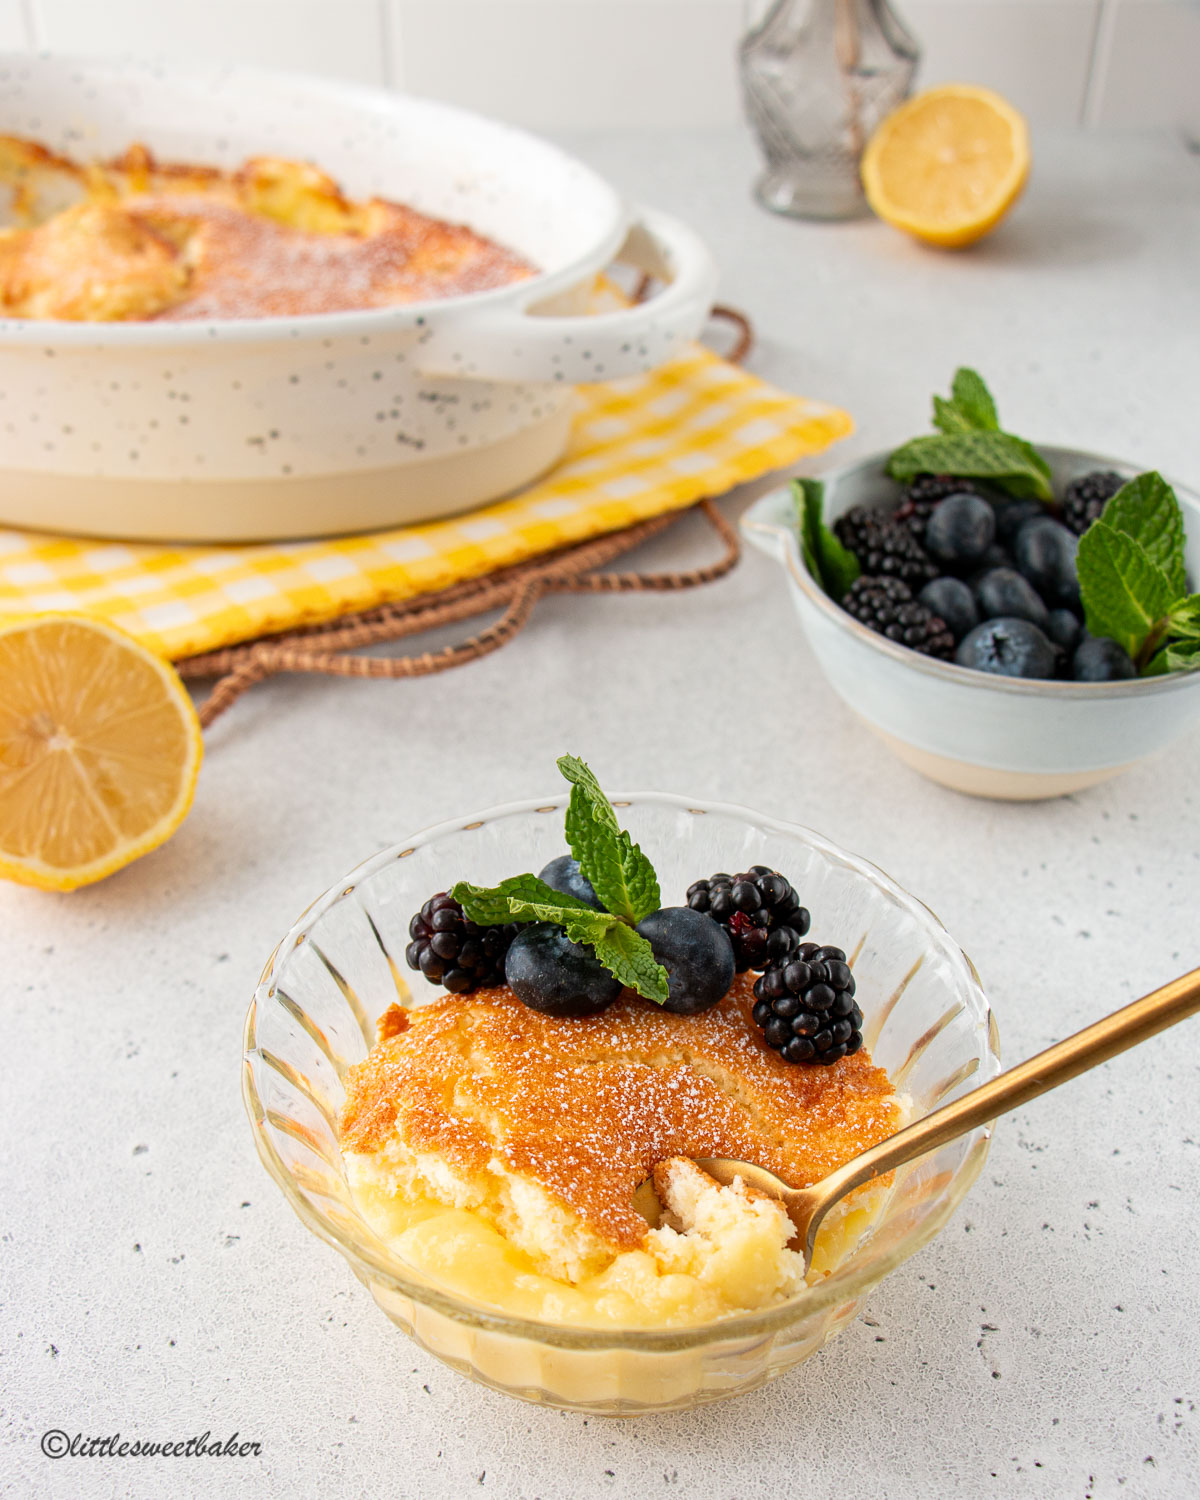 A bowl of lemon pudding cake with some berries and a sprig of mint.